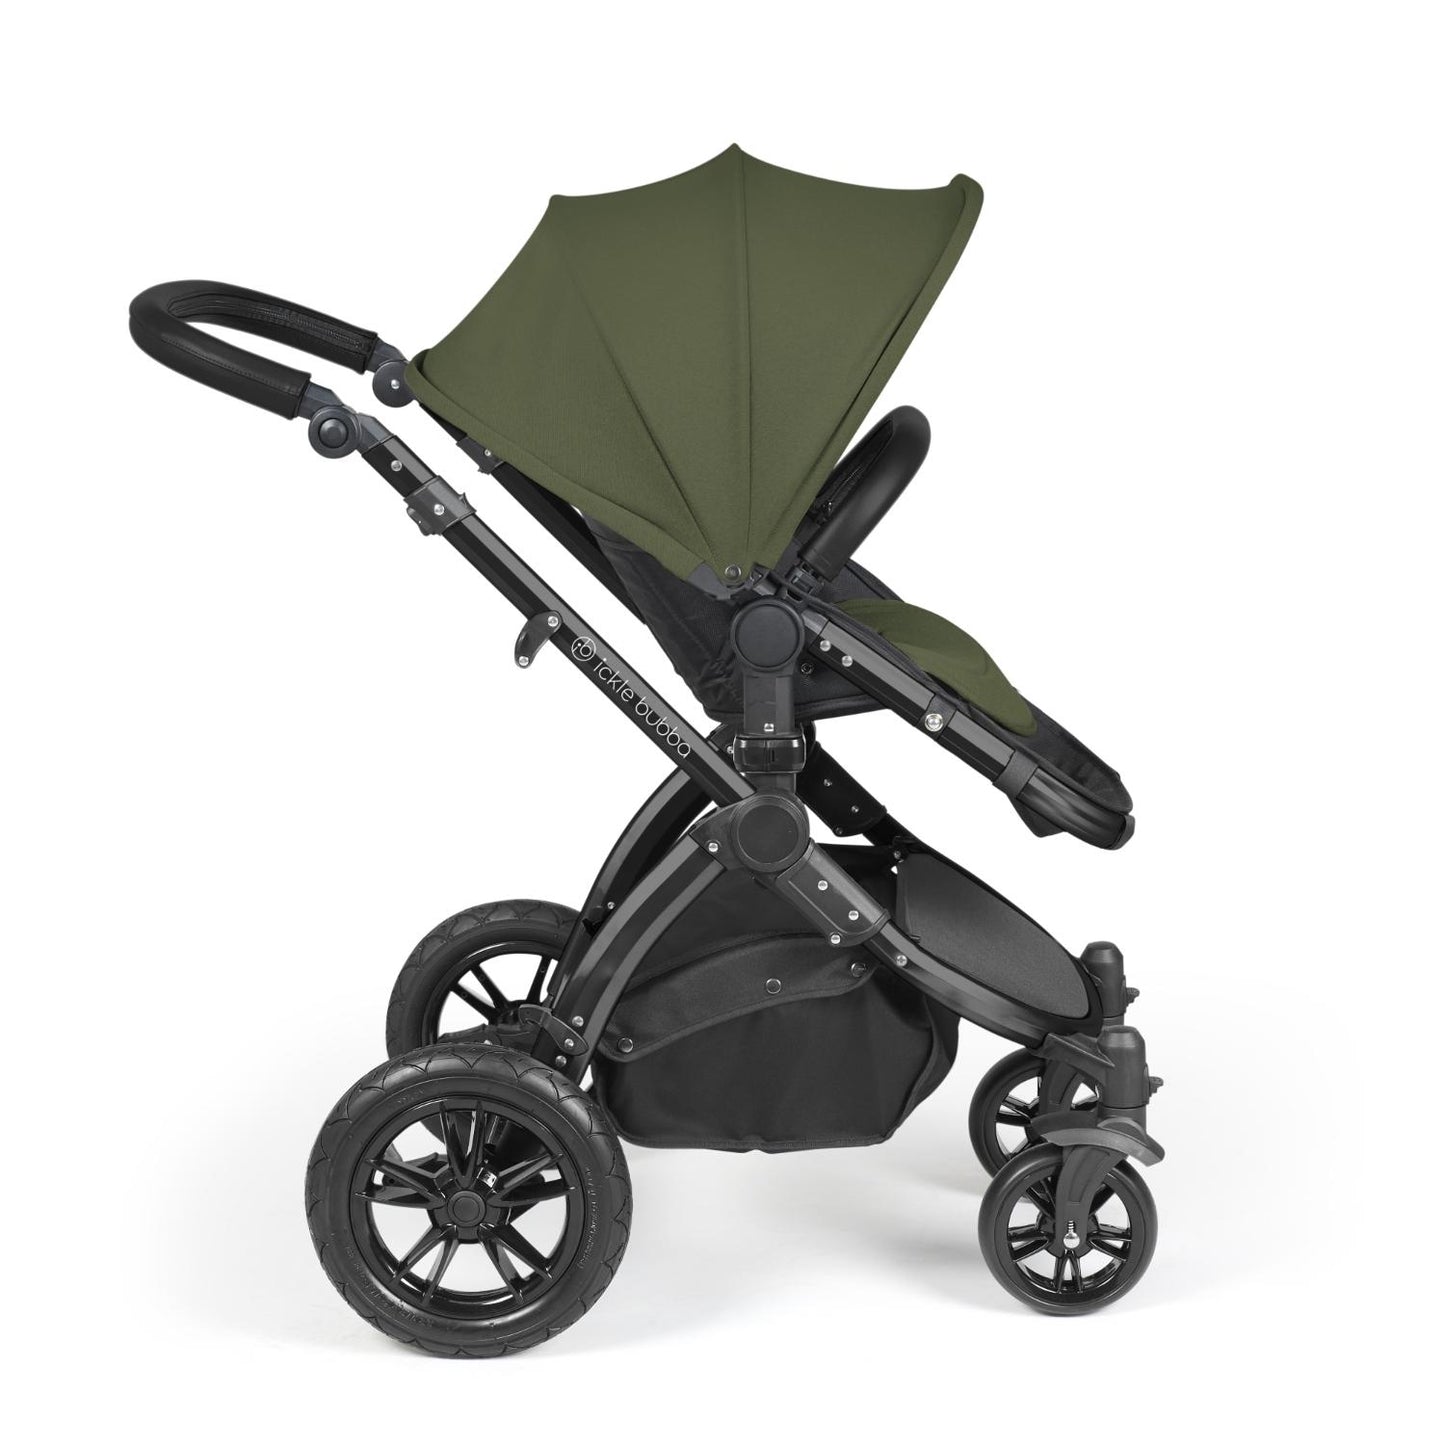 Side view of Ickle Bubba Stomp Luxe Pushchair with seat unit attached in Woodland green colour